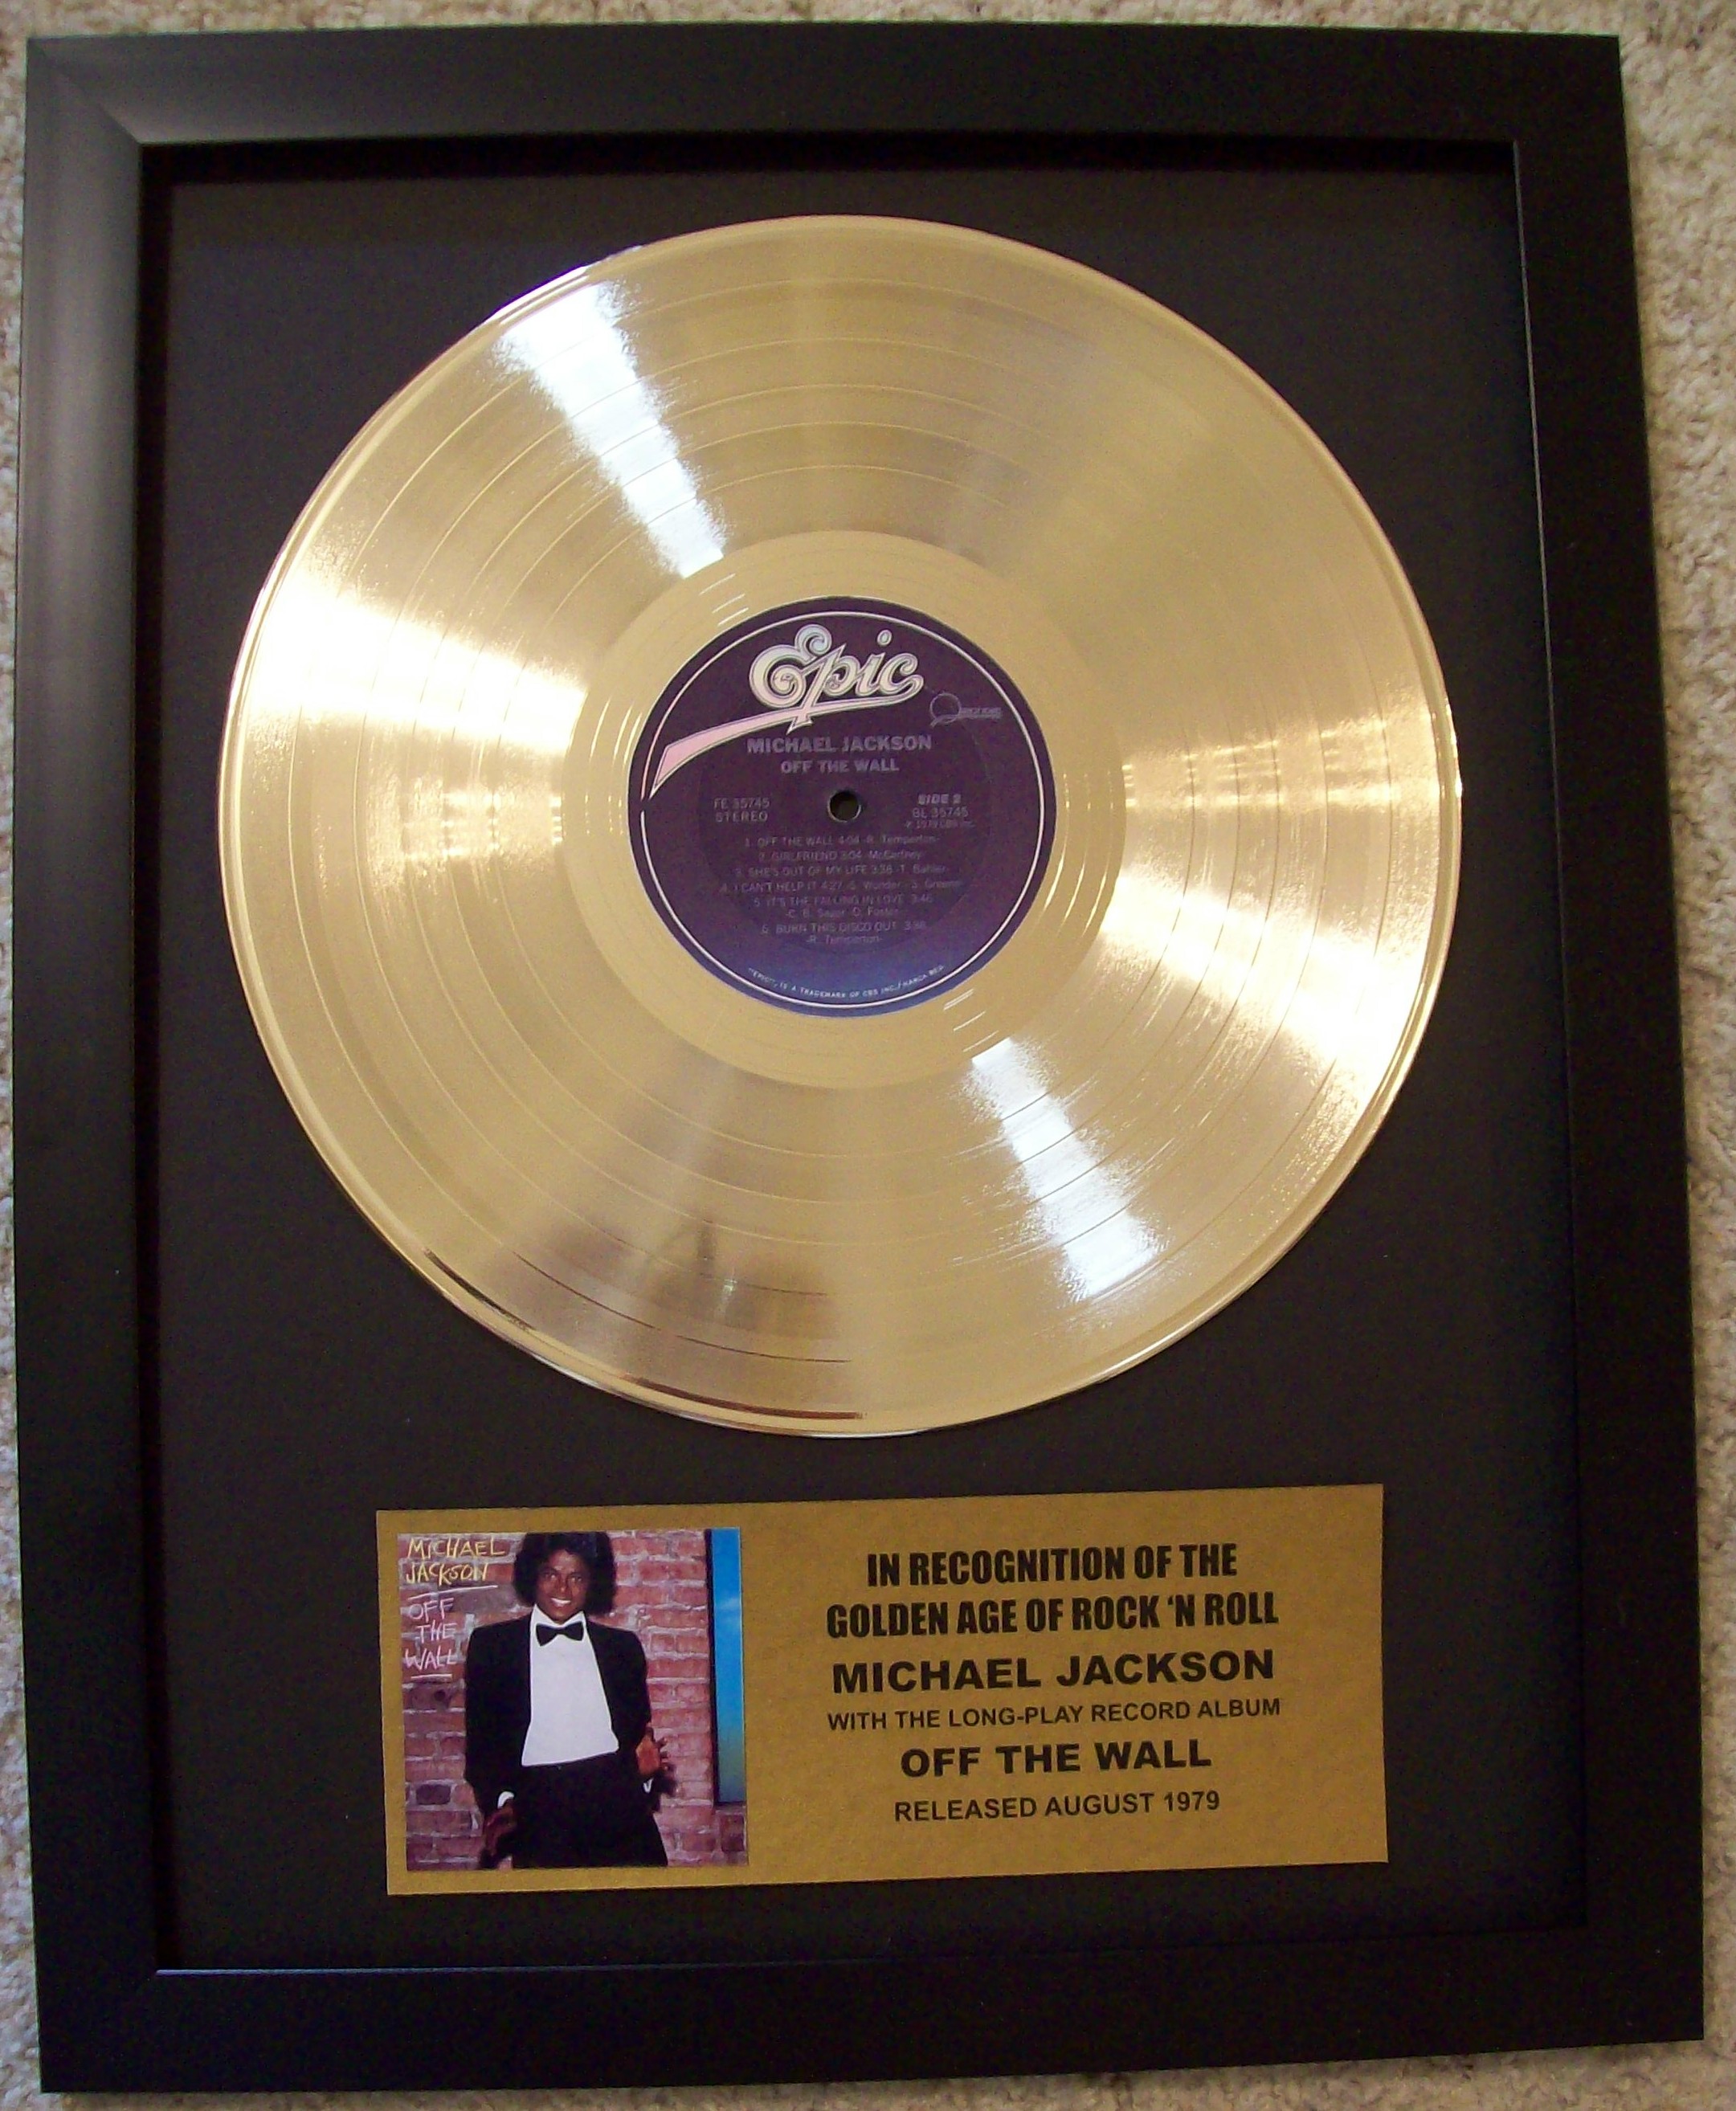 Image for Michael Jackson "Off The Wall"